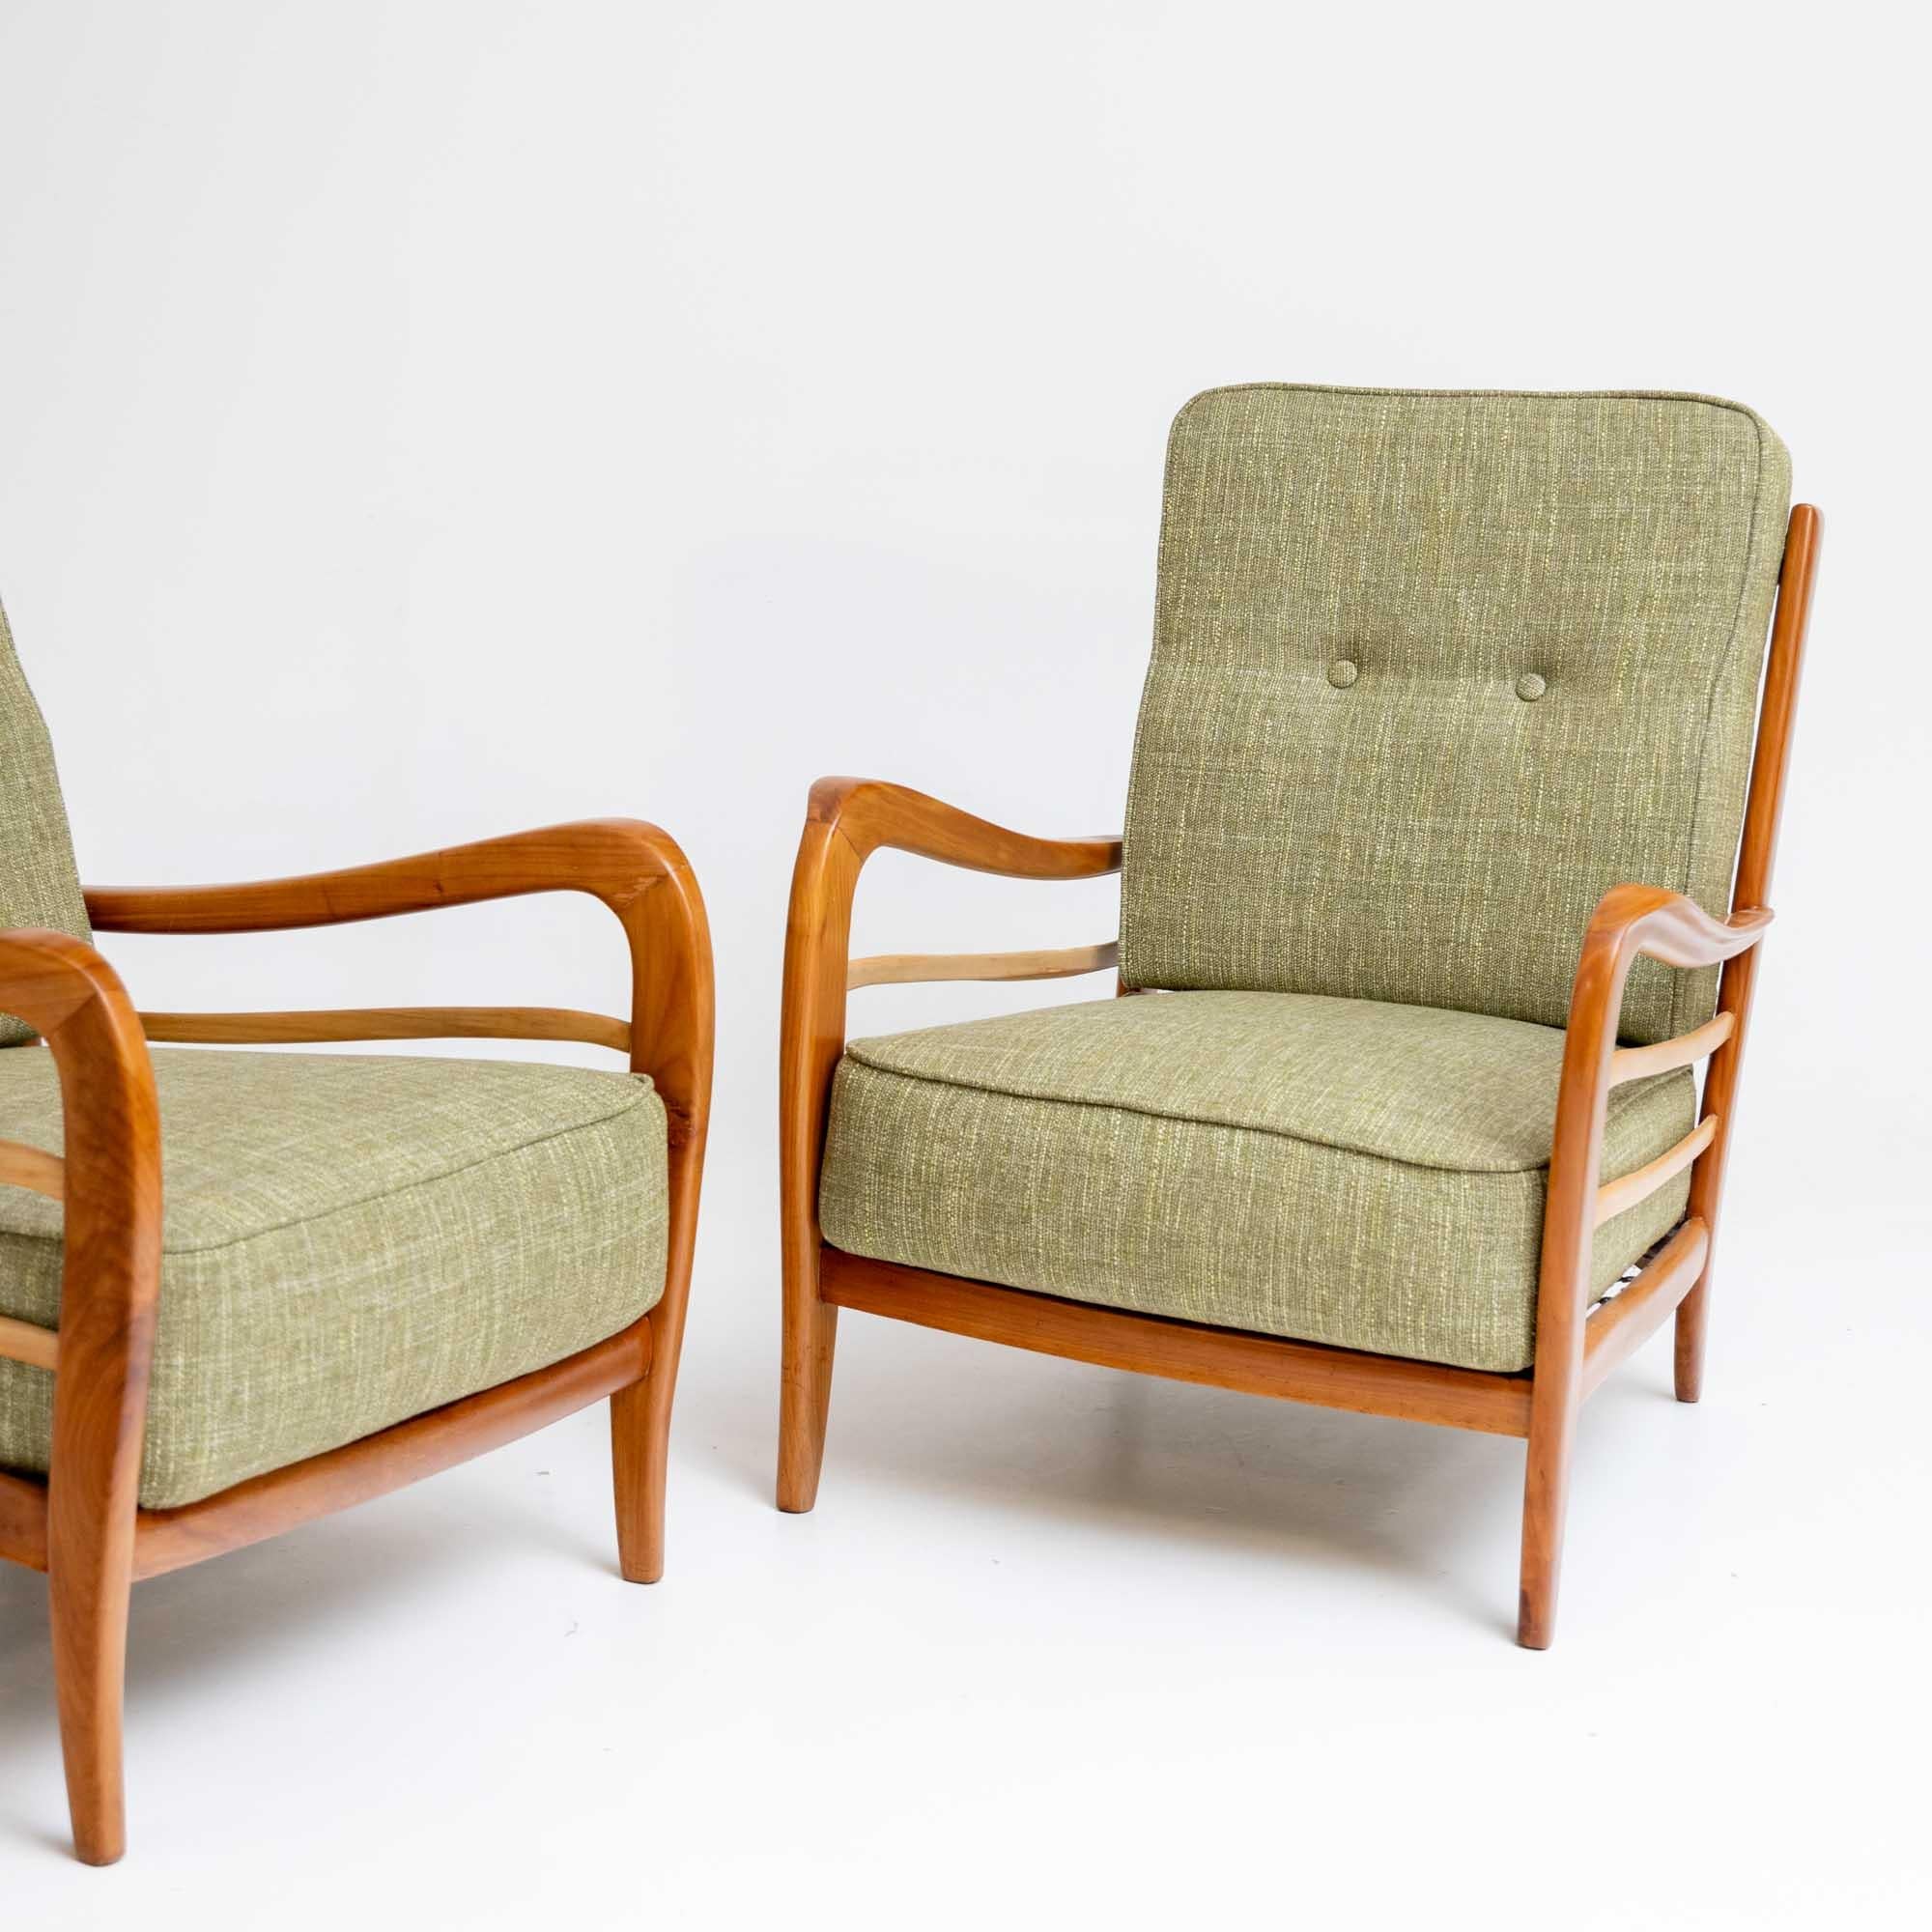 Pair of Lounge Chairs in Cherry, green Upholstery attr. Paolo Buffa, Italy 1950s In Excellent Condition For Sale In Greding, DE